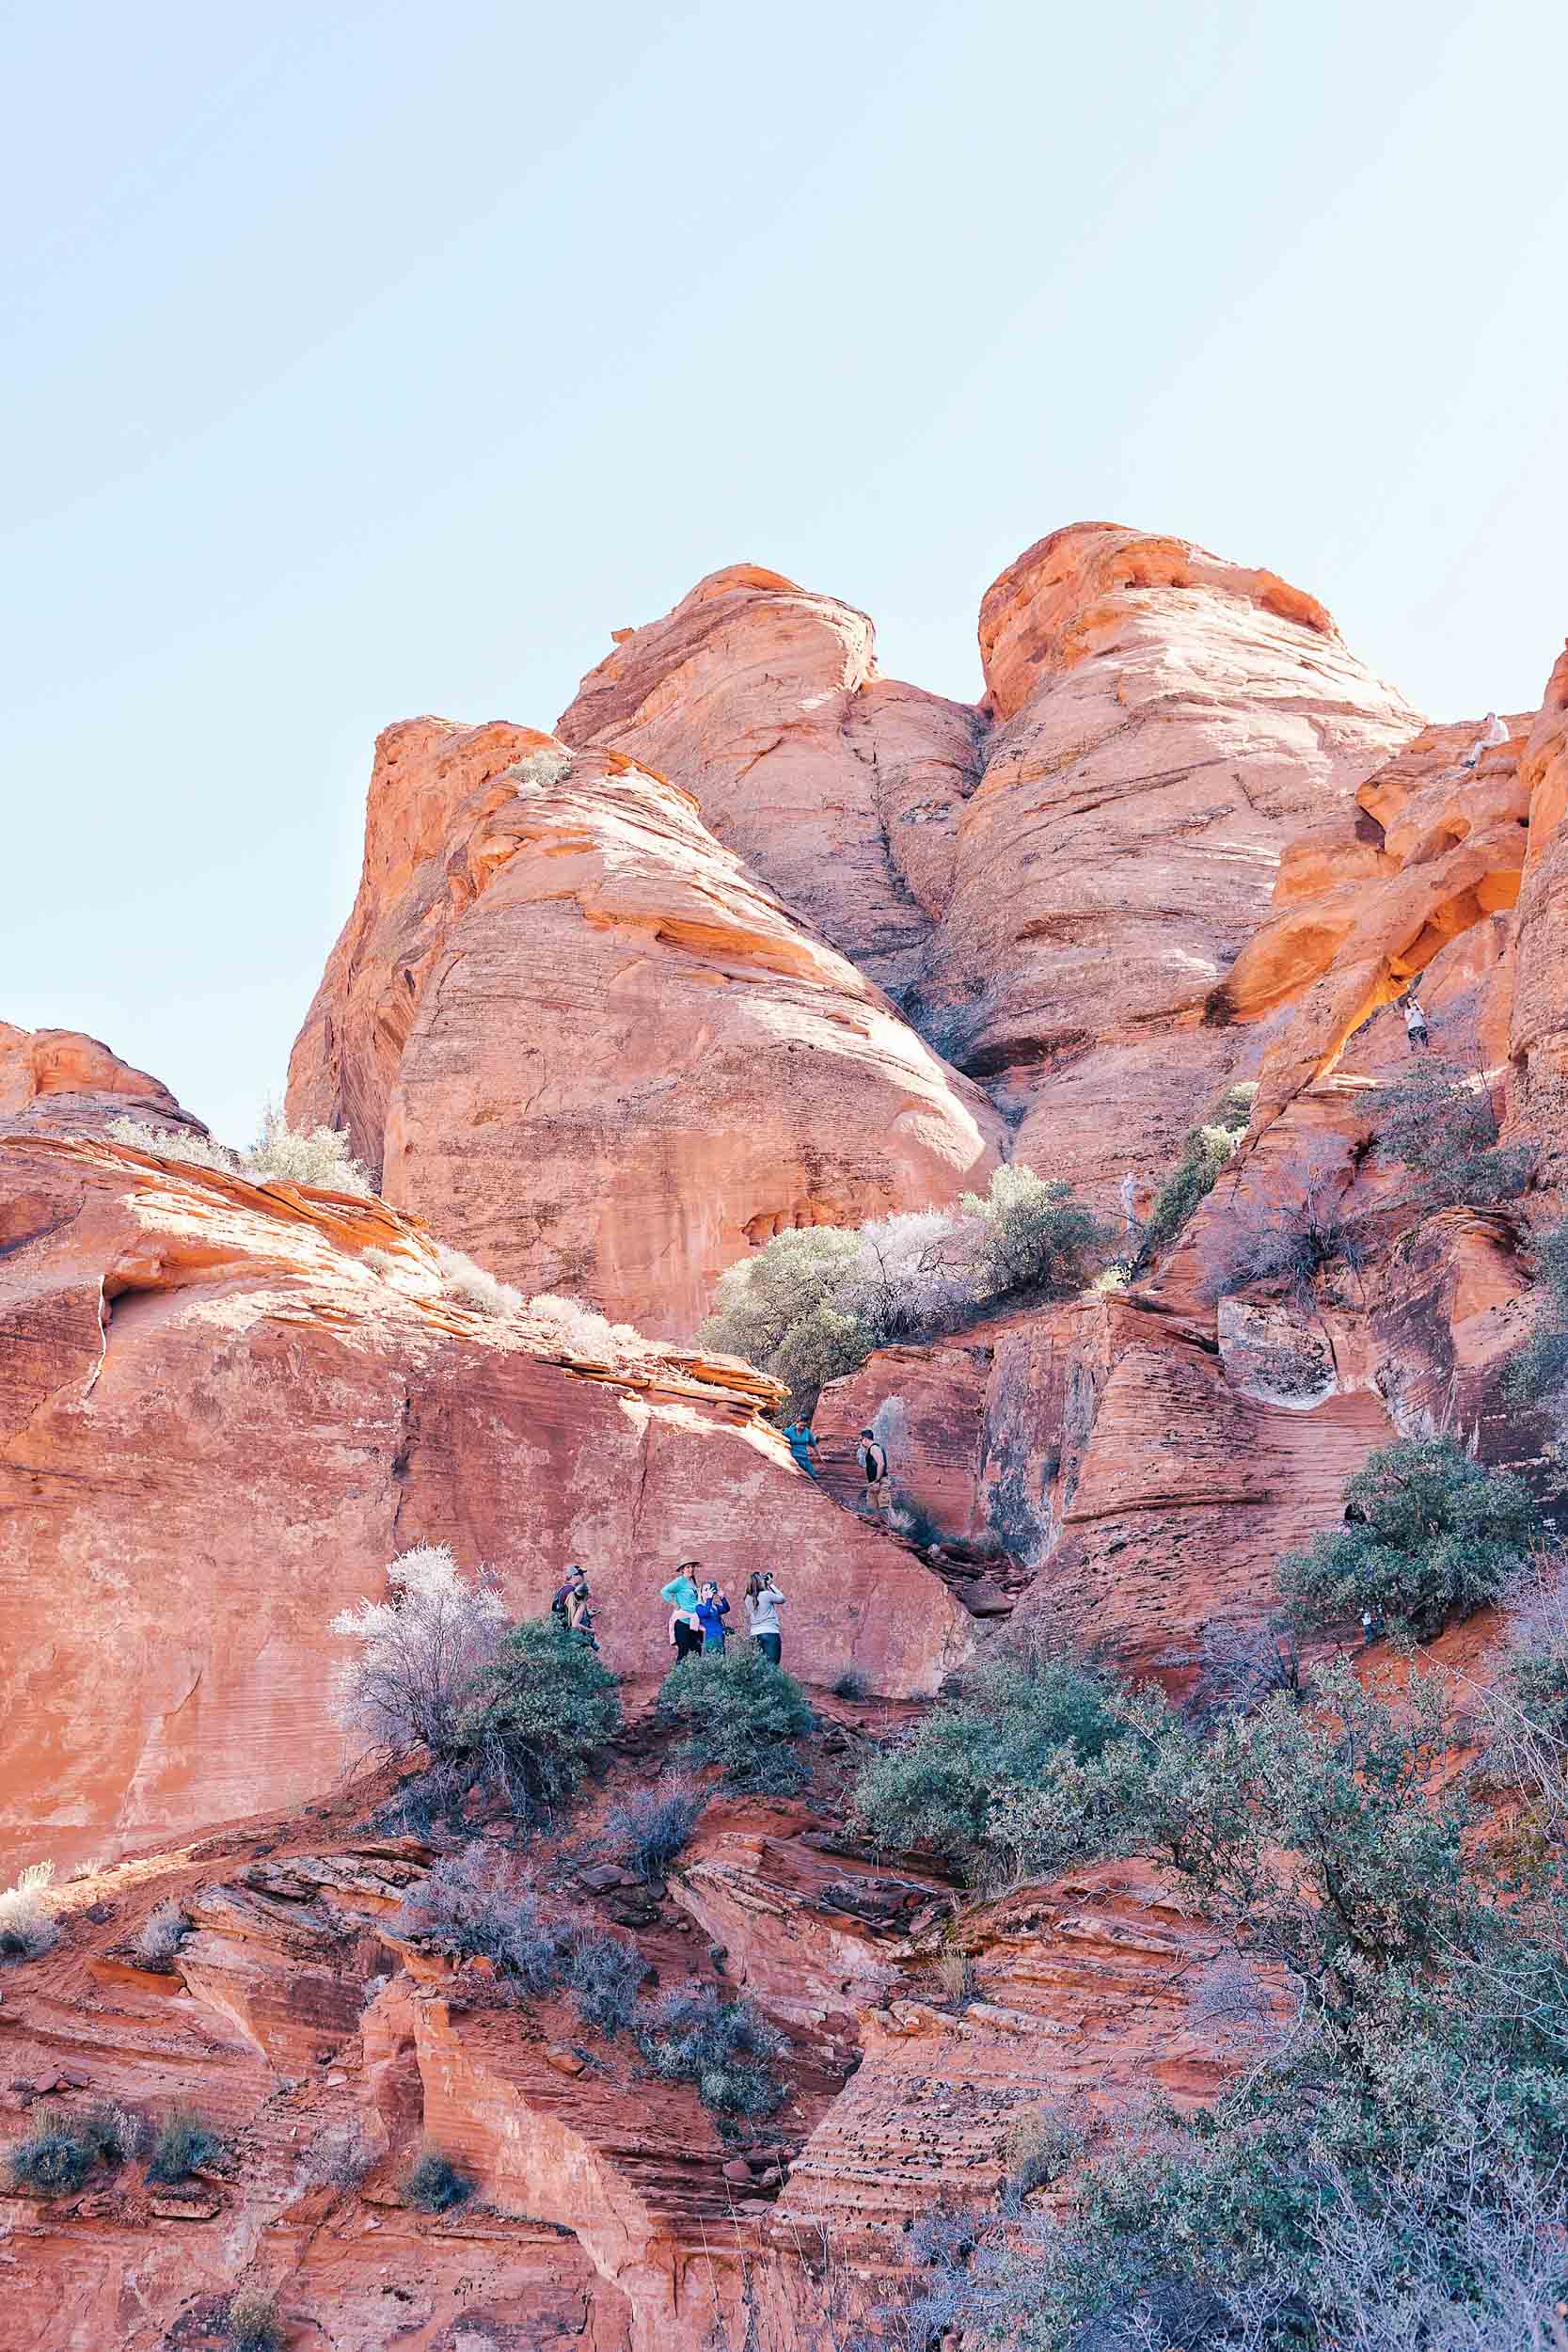 February in St. George, Utah calls for mild temperatures and a lot of sunshine!